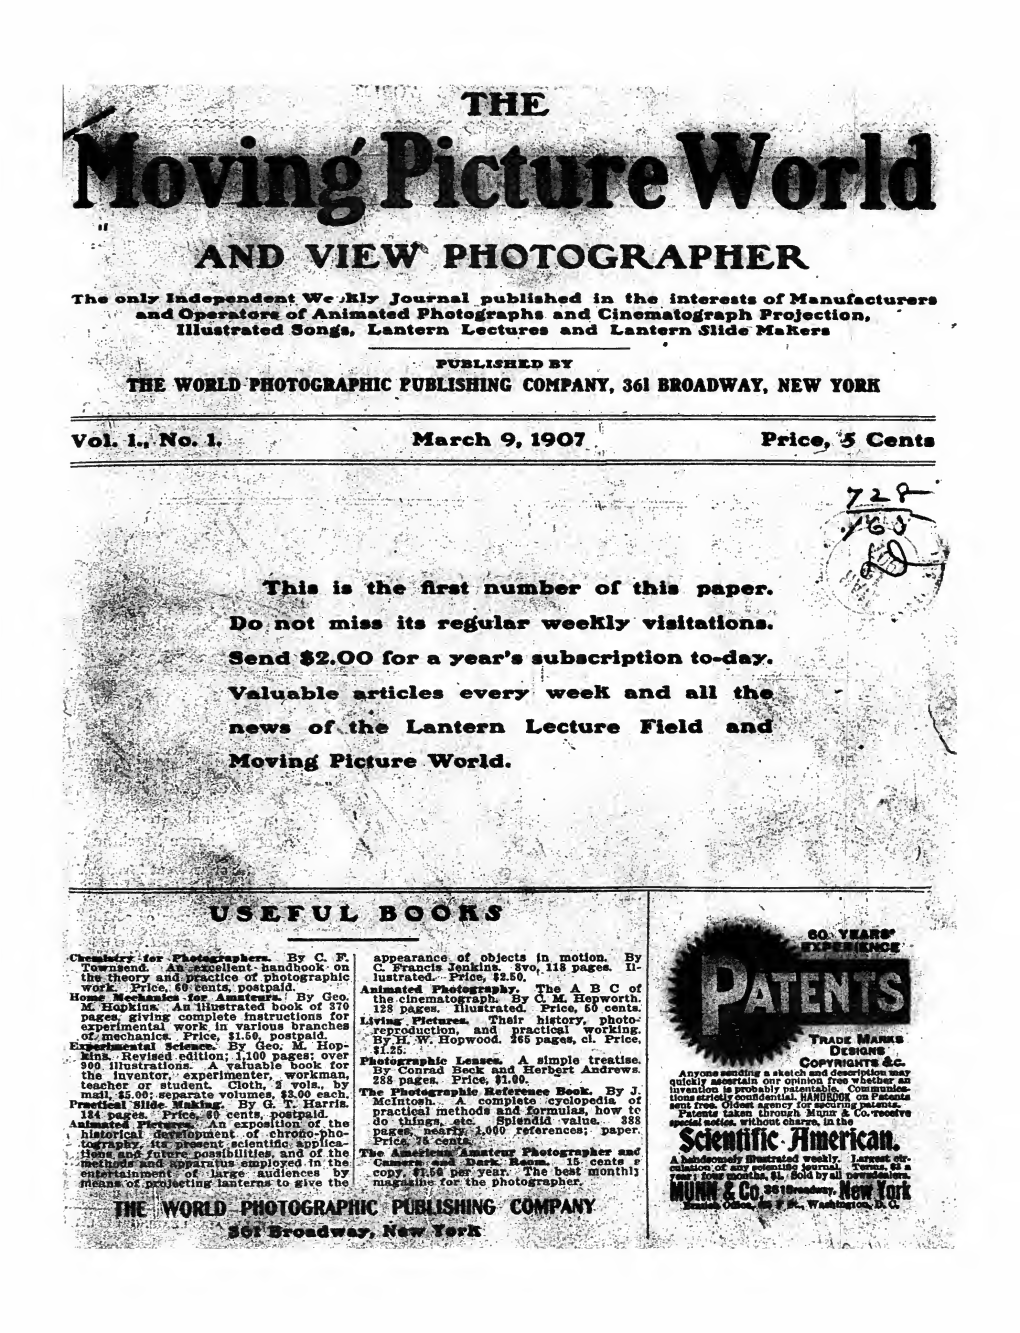 The Moving Picture World (March 1907)